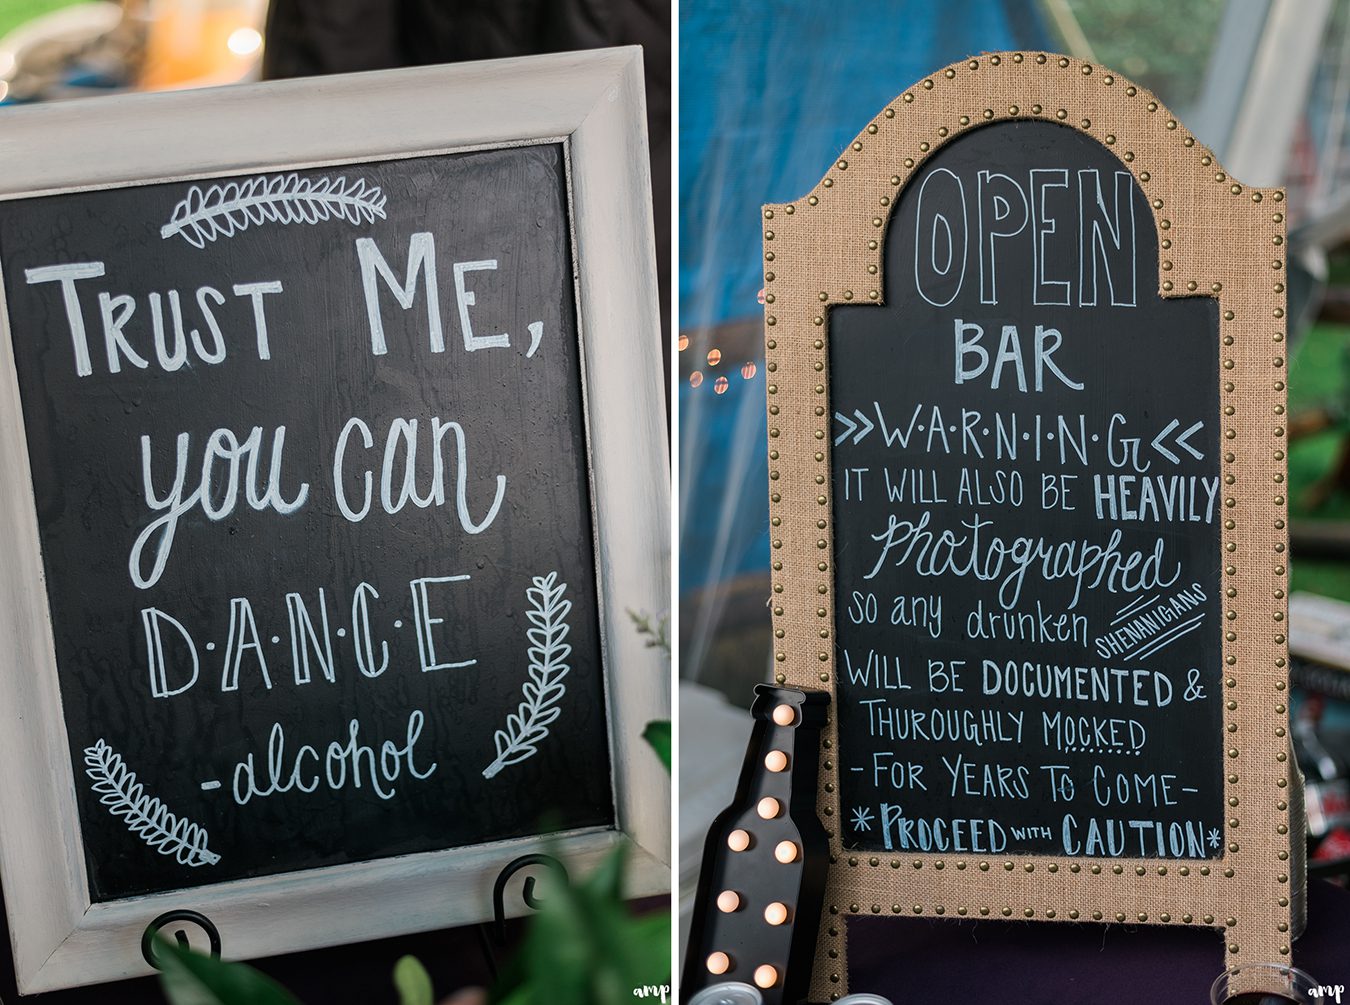 Signs about drinking at the bar